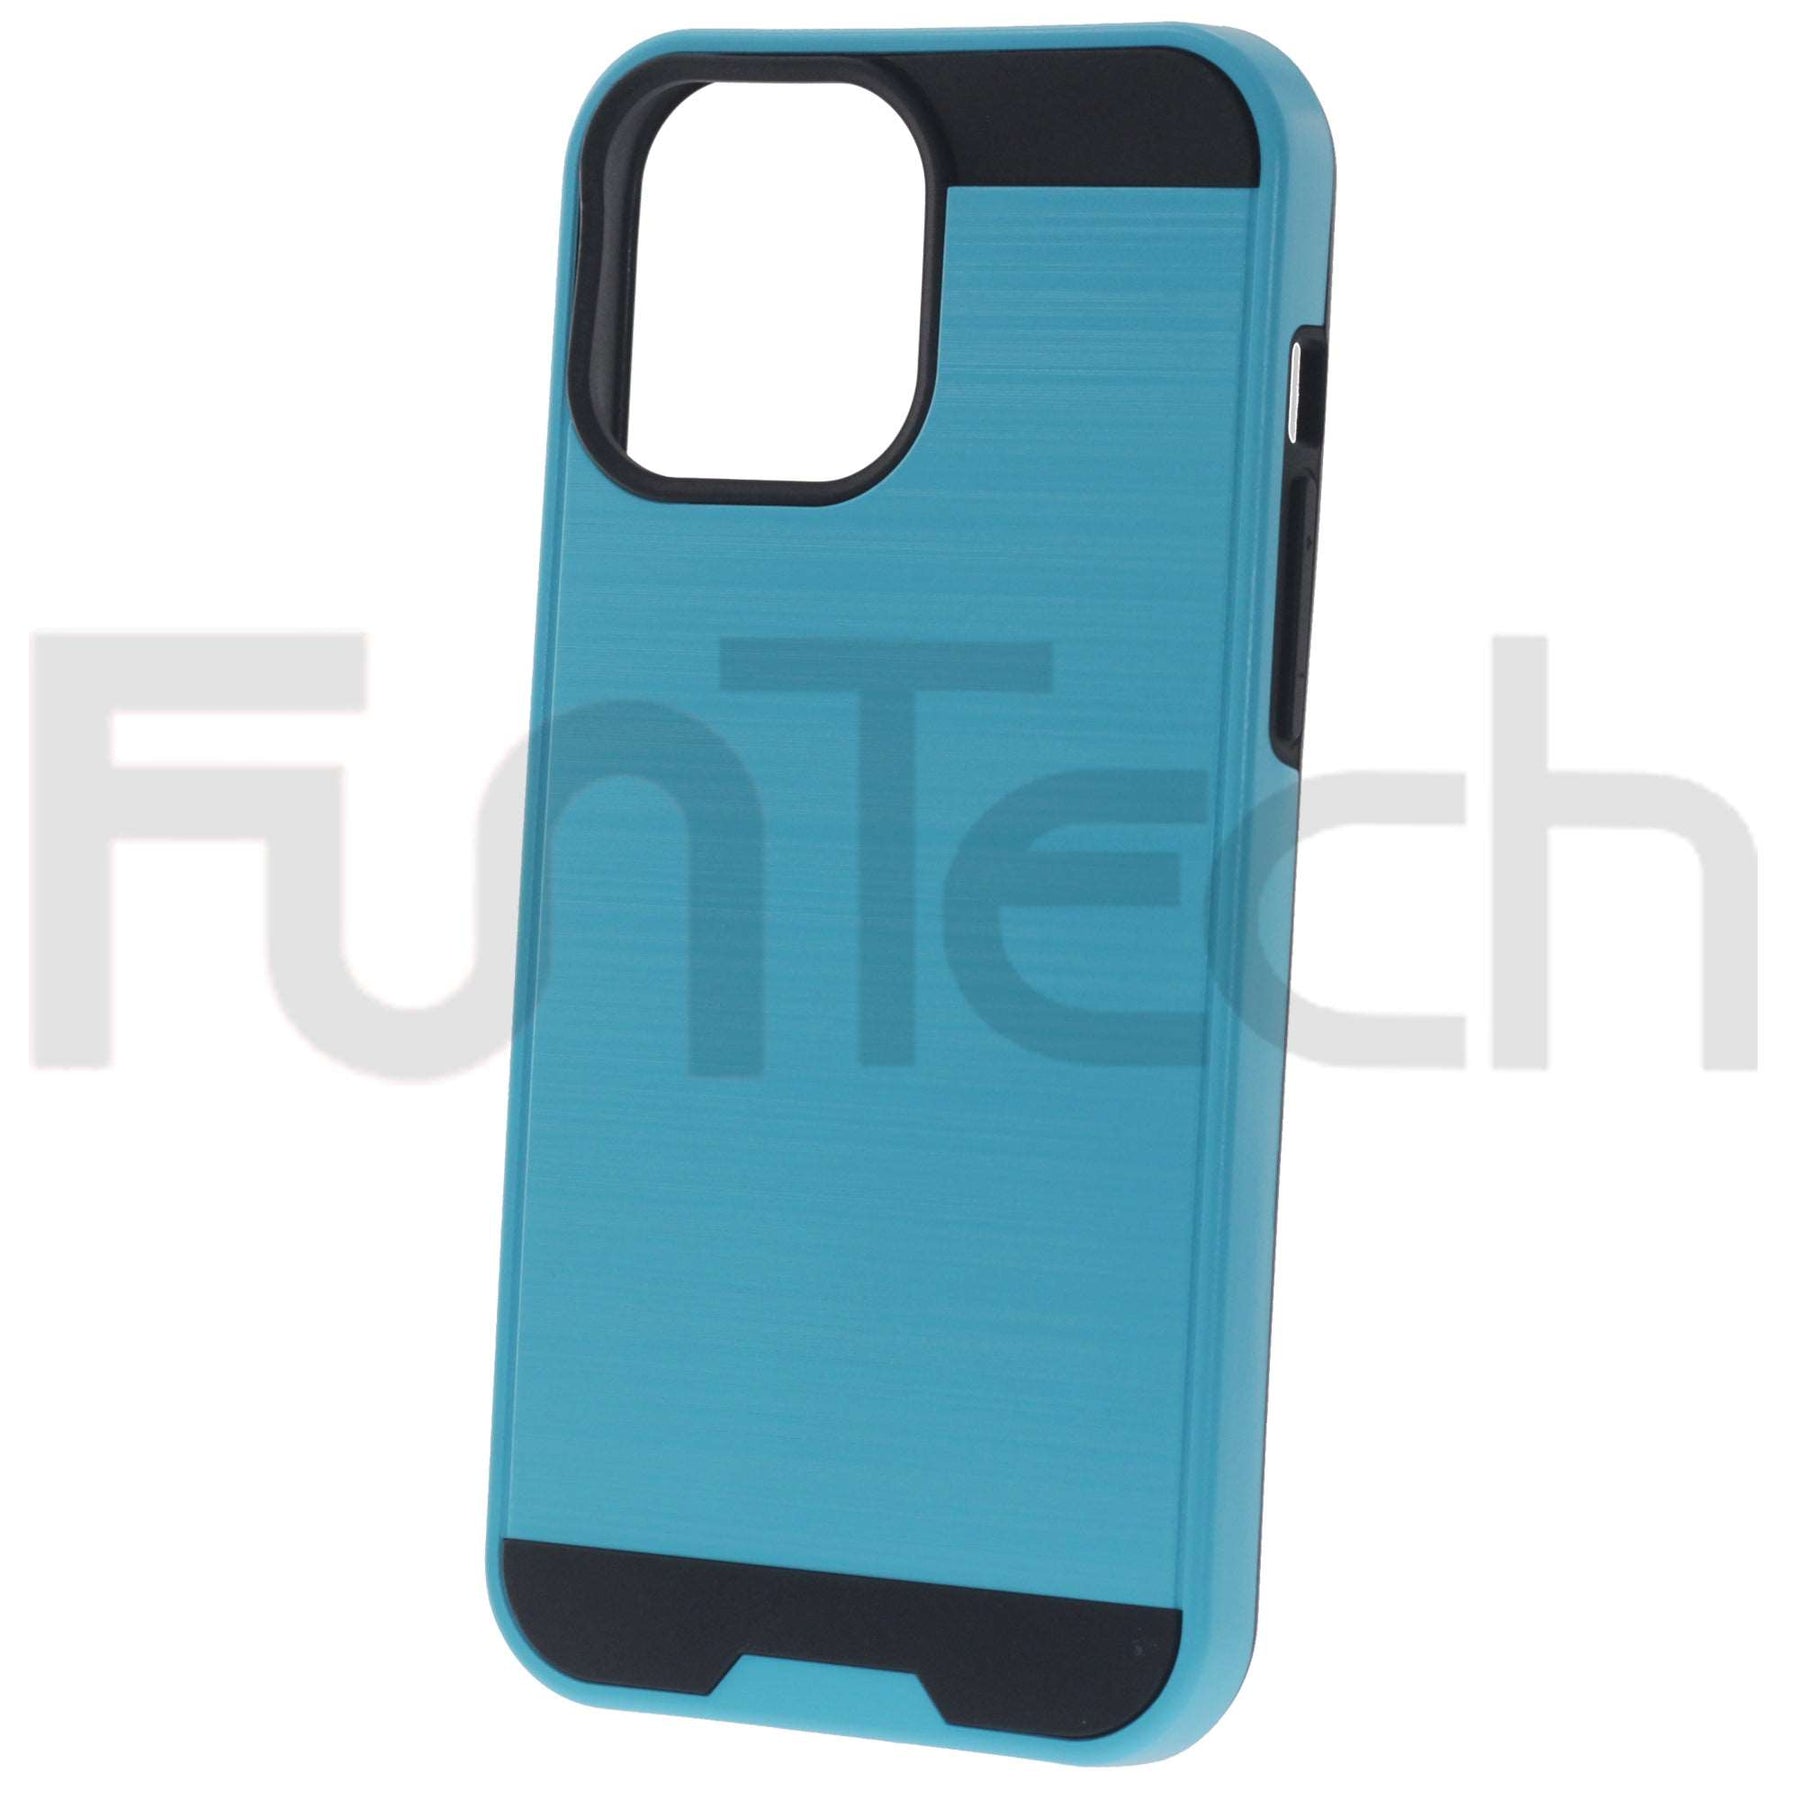 Apple iPhone 13 Pro Max, Slim Armor Case, Color Teal.